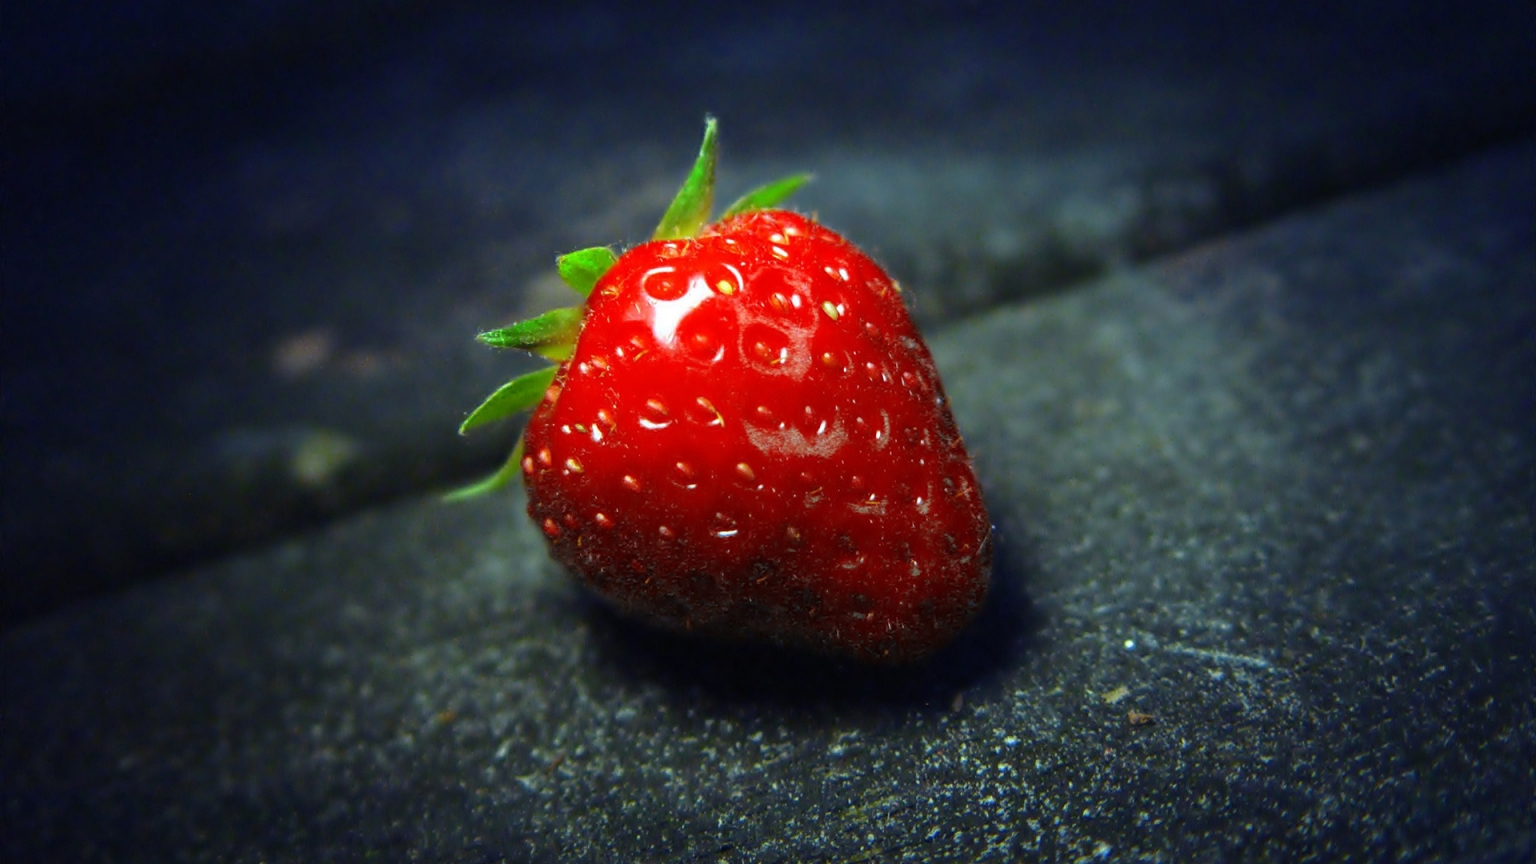 The Strawberry for 1536 x 864 HDTV resolution